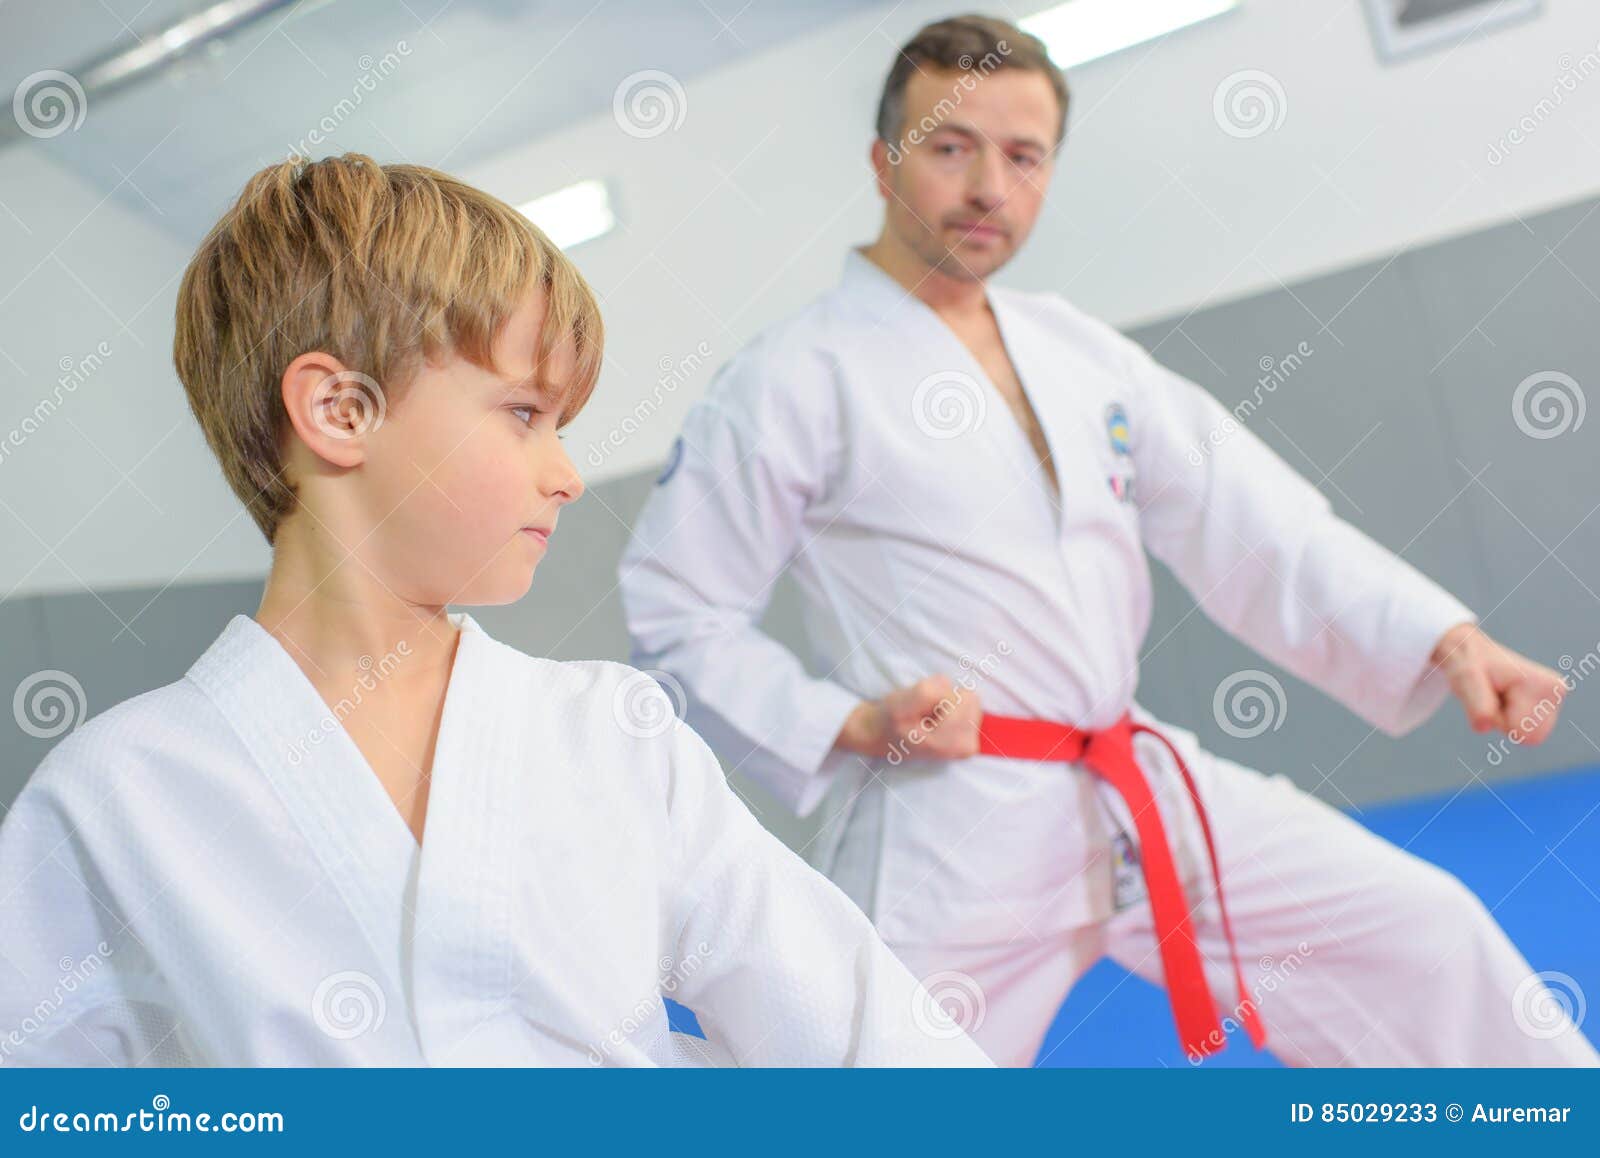 Young Boy in Martial Arts Lesson Stock Image - Image of karate ...